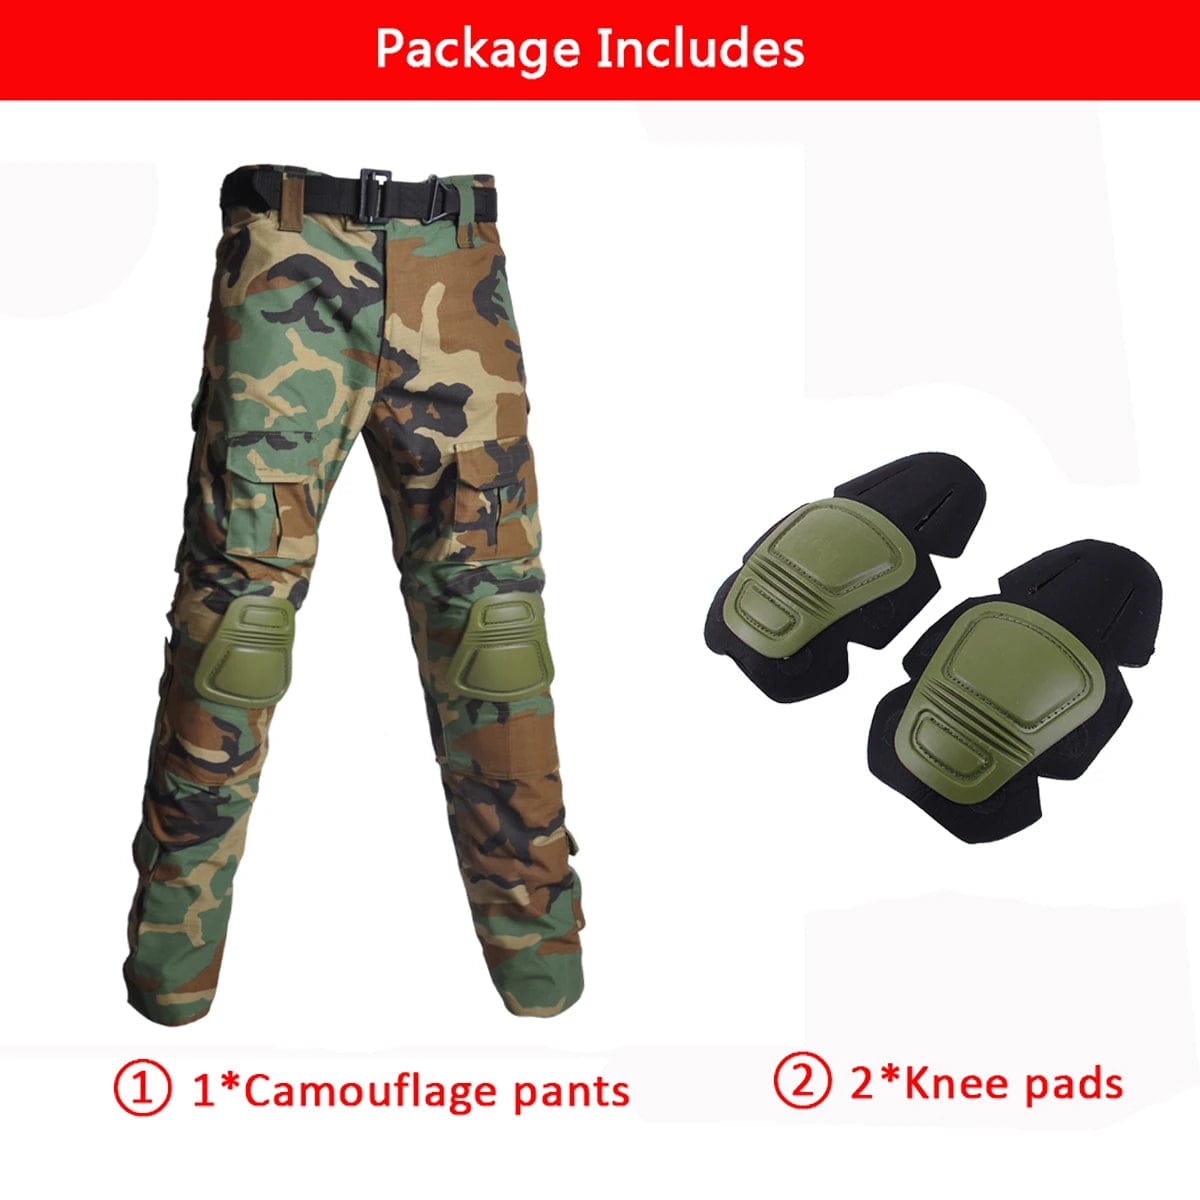 ACTION AIRSOFT green jungle / S(50-60kg) Airsoft Uniform Tactical Suits Army Camouflage Pants Military Clothing Hunting Clothes Paintball Suits Combat Shirt Pants +Pads